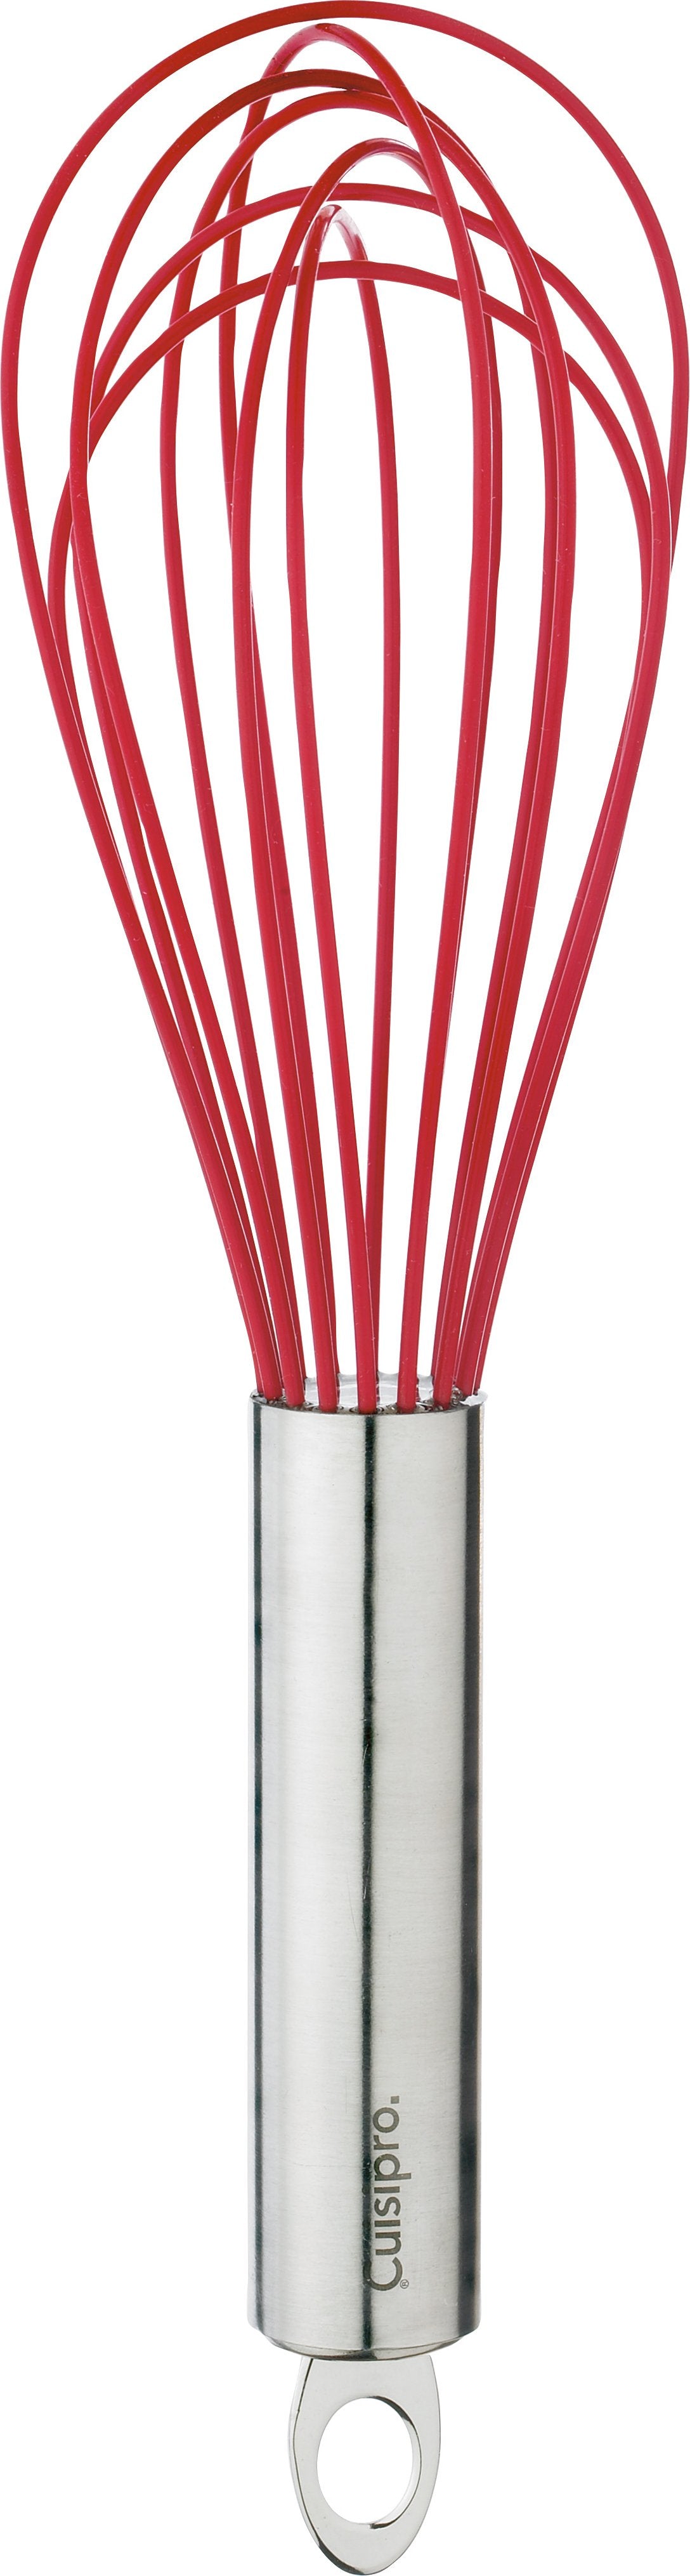 Cuisipro Frosted Silicone & Stainless Steel Flat Whisk